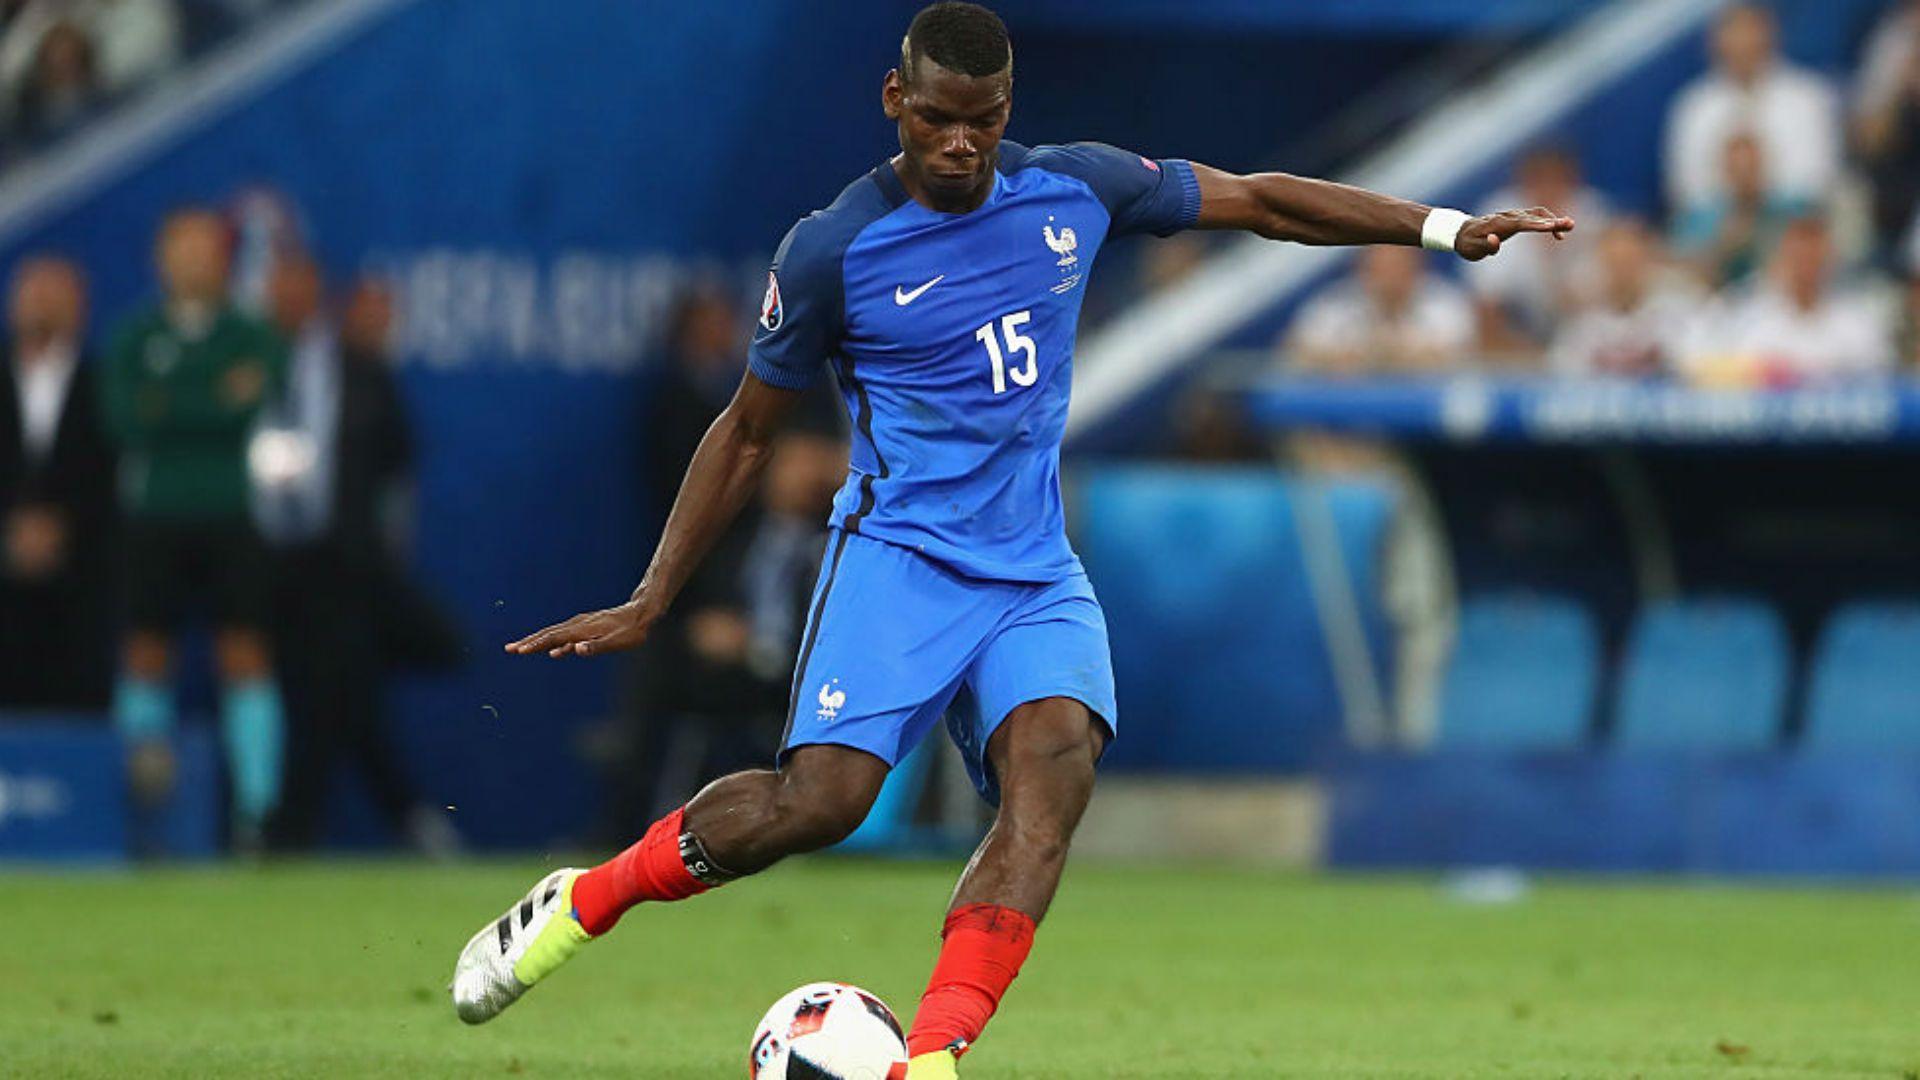 Paul Pogba to Manchester United: Five reasons why they needed him